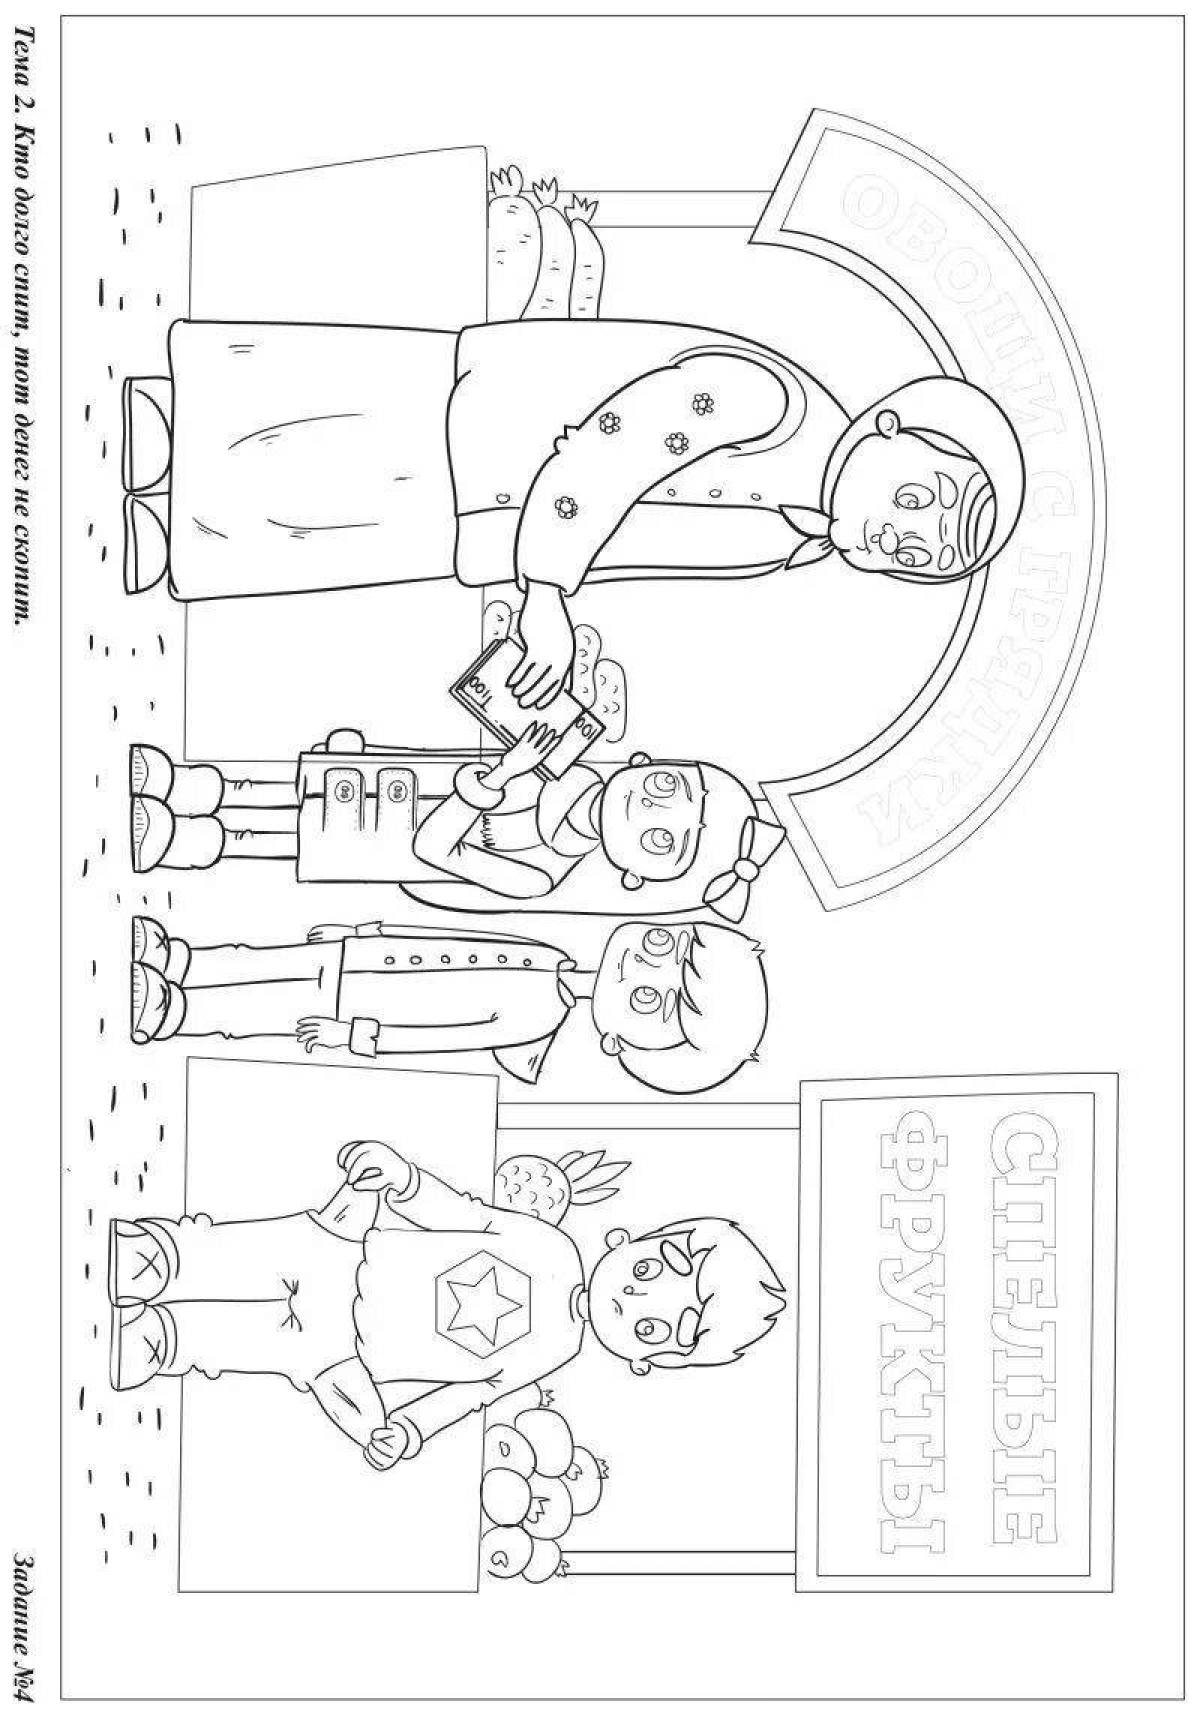 Exciting 3rd grade financial literacy coloring book